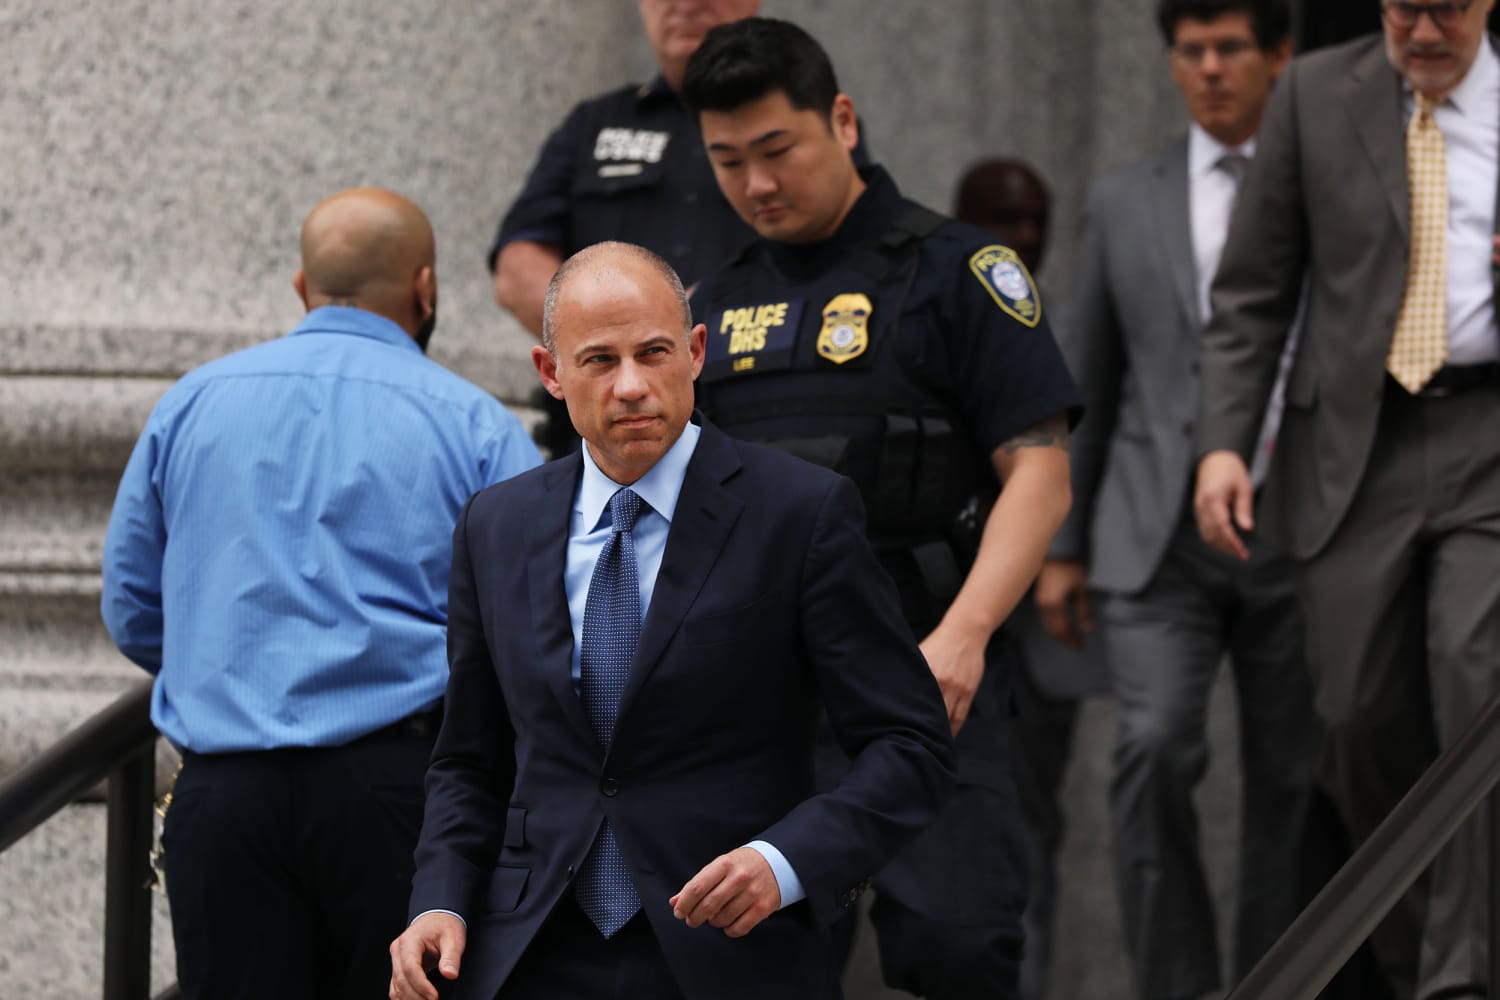 Feds want Michael Avenatti to start prison term now for Nike extortion conviction